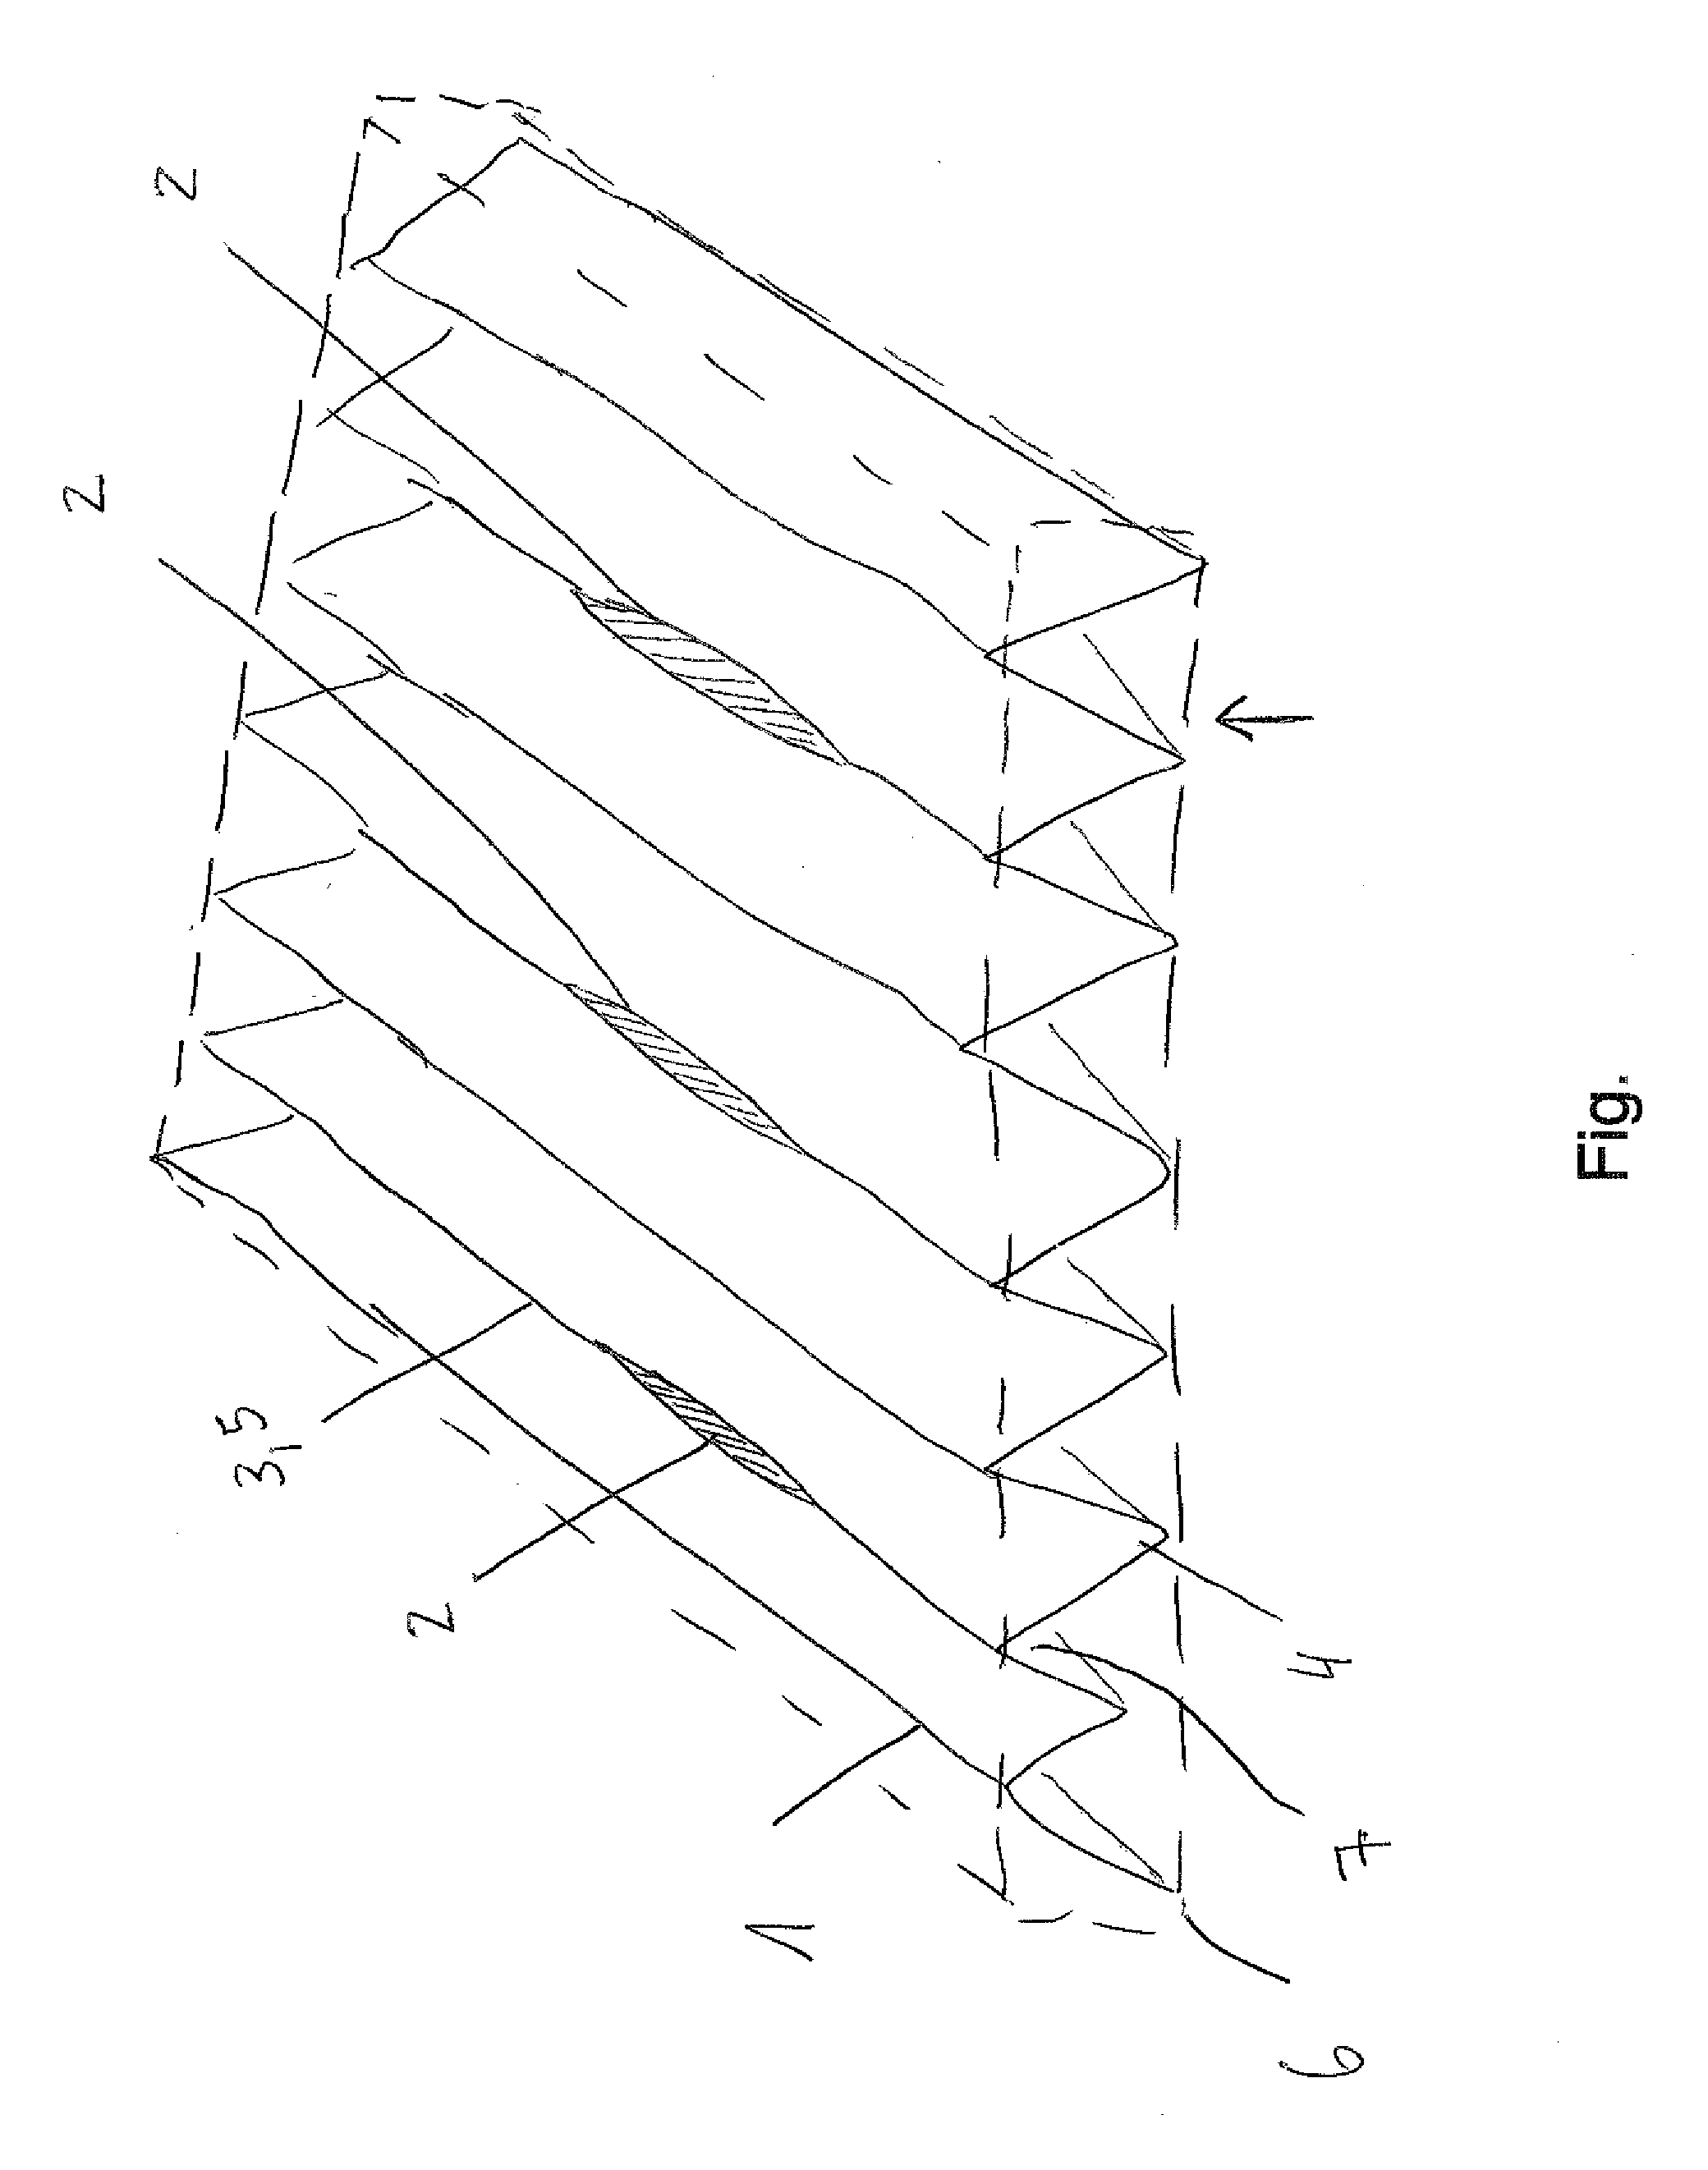 Filter Element Provided With Channels Of Variable Dimensions And Arrangement